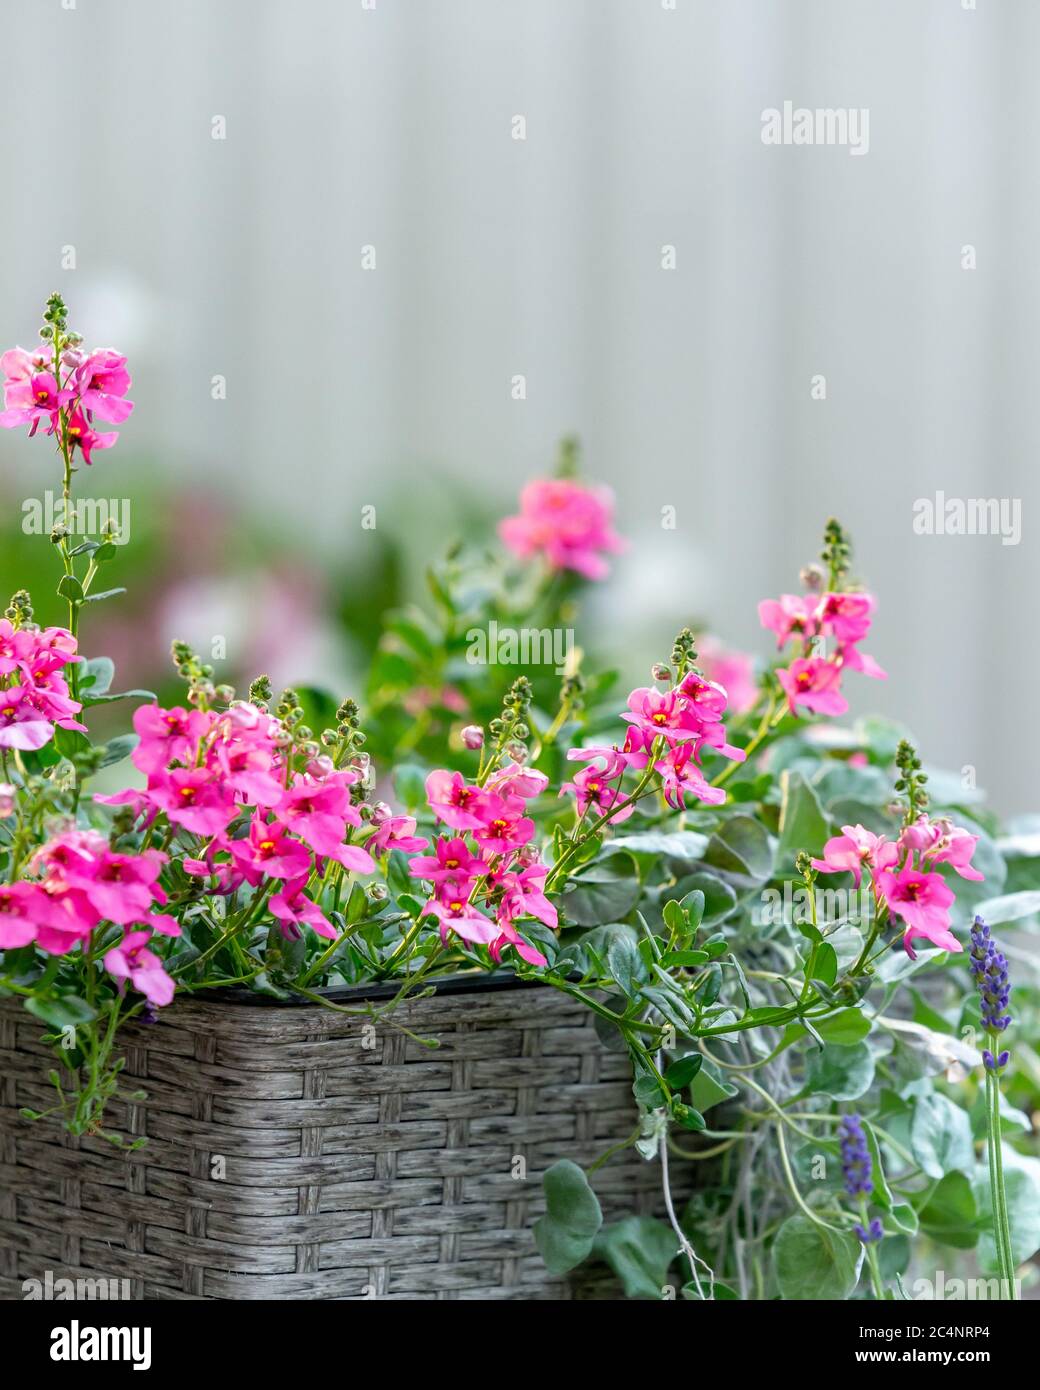 Vertical shot of pink diascia flowers in a basket Stock Photo